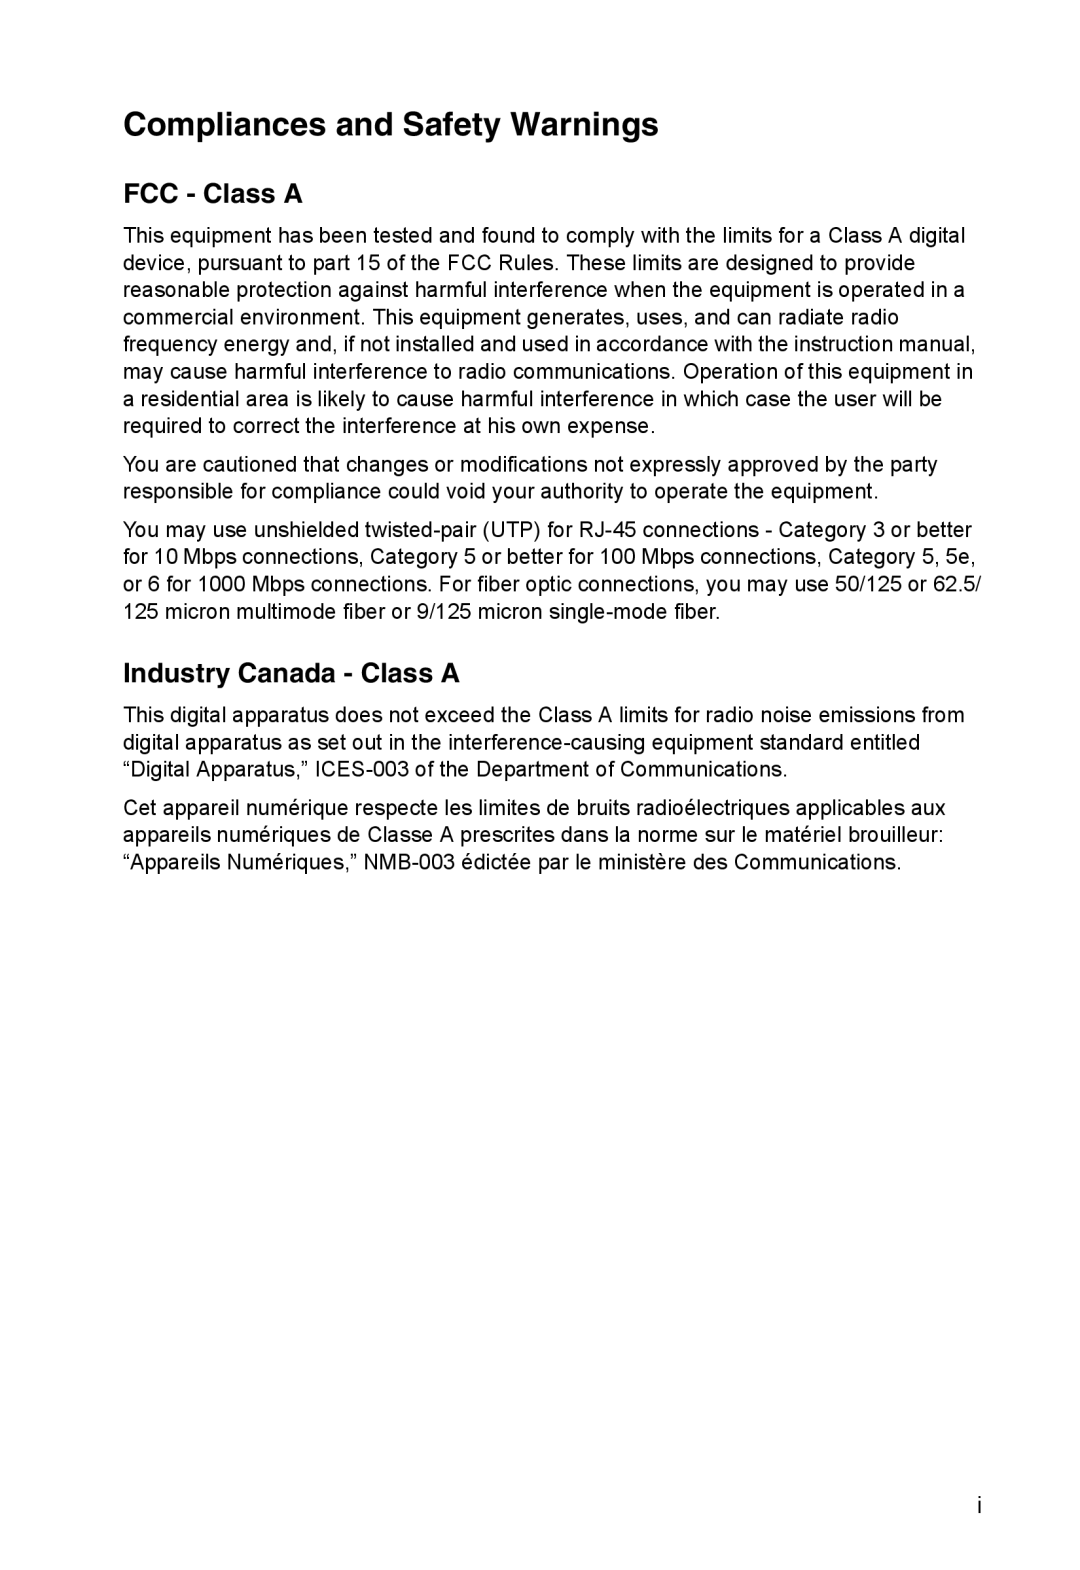 SMC Networks SMC8126PL2-F manual Compliances and Safety Warnings, FCC - Class A, Industry Canada - Class A 